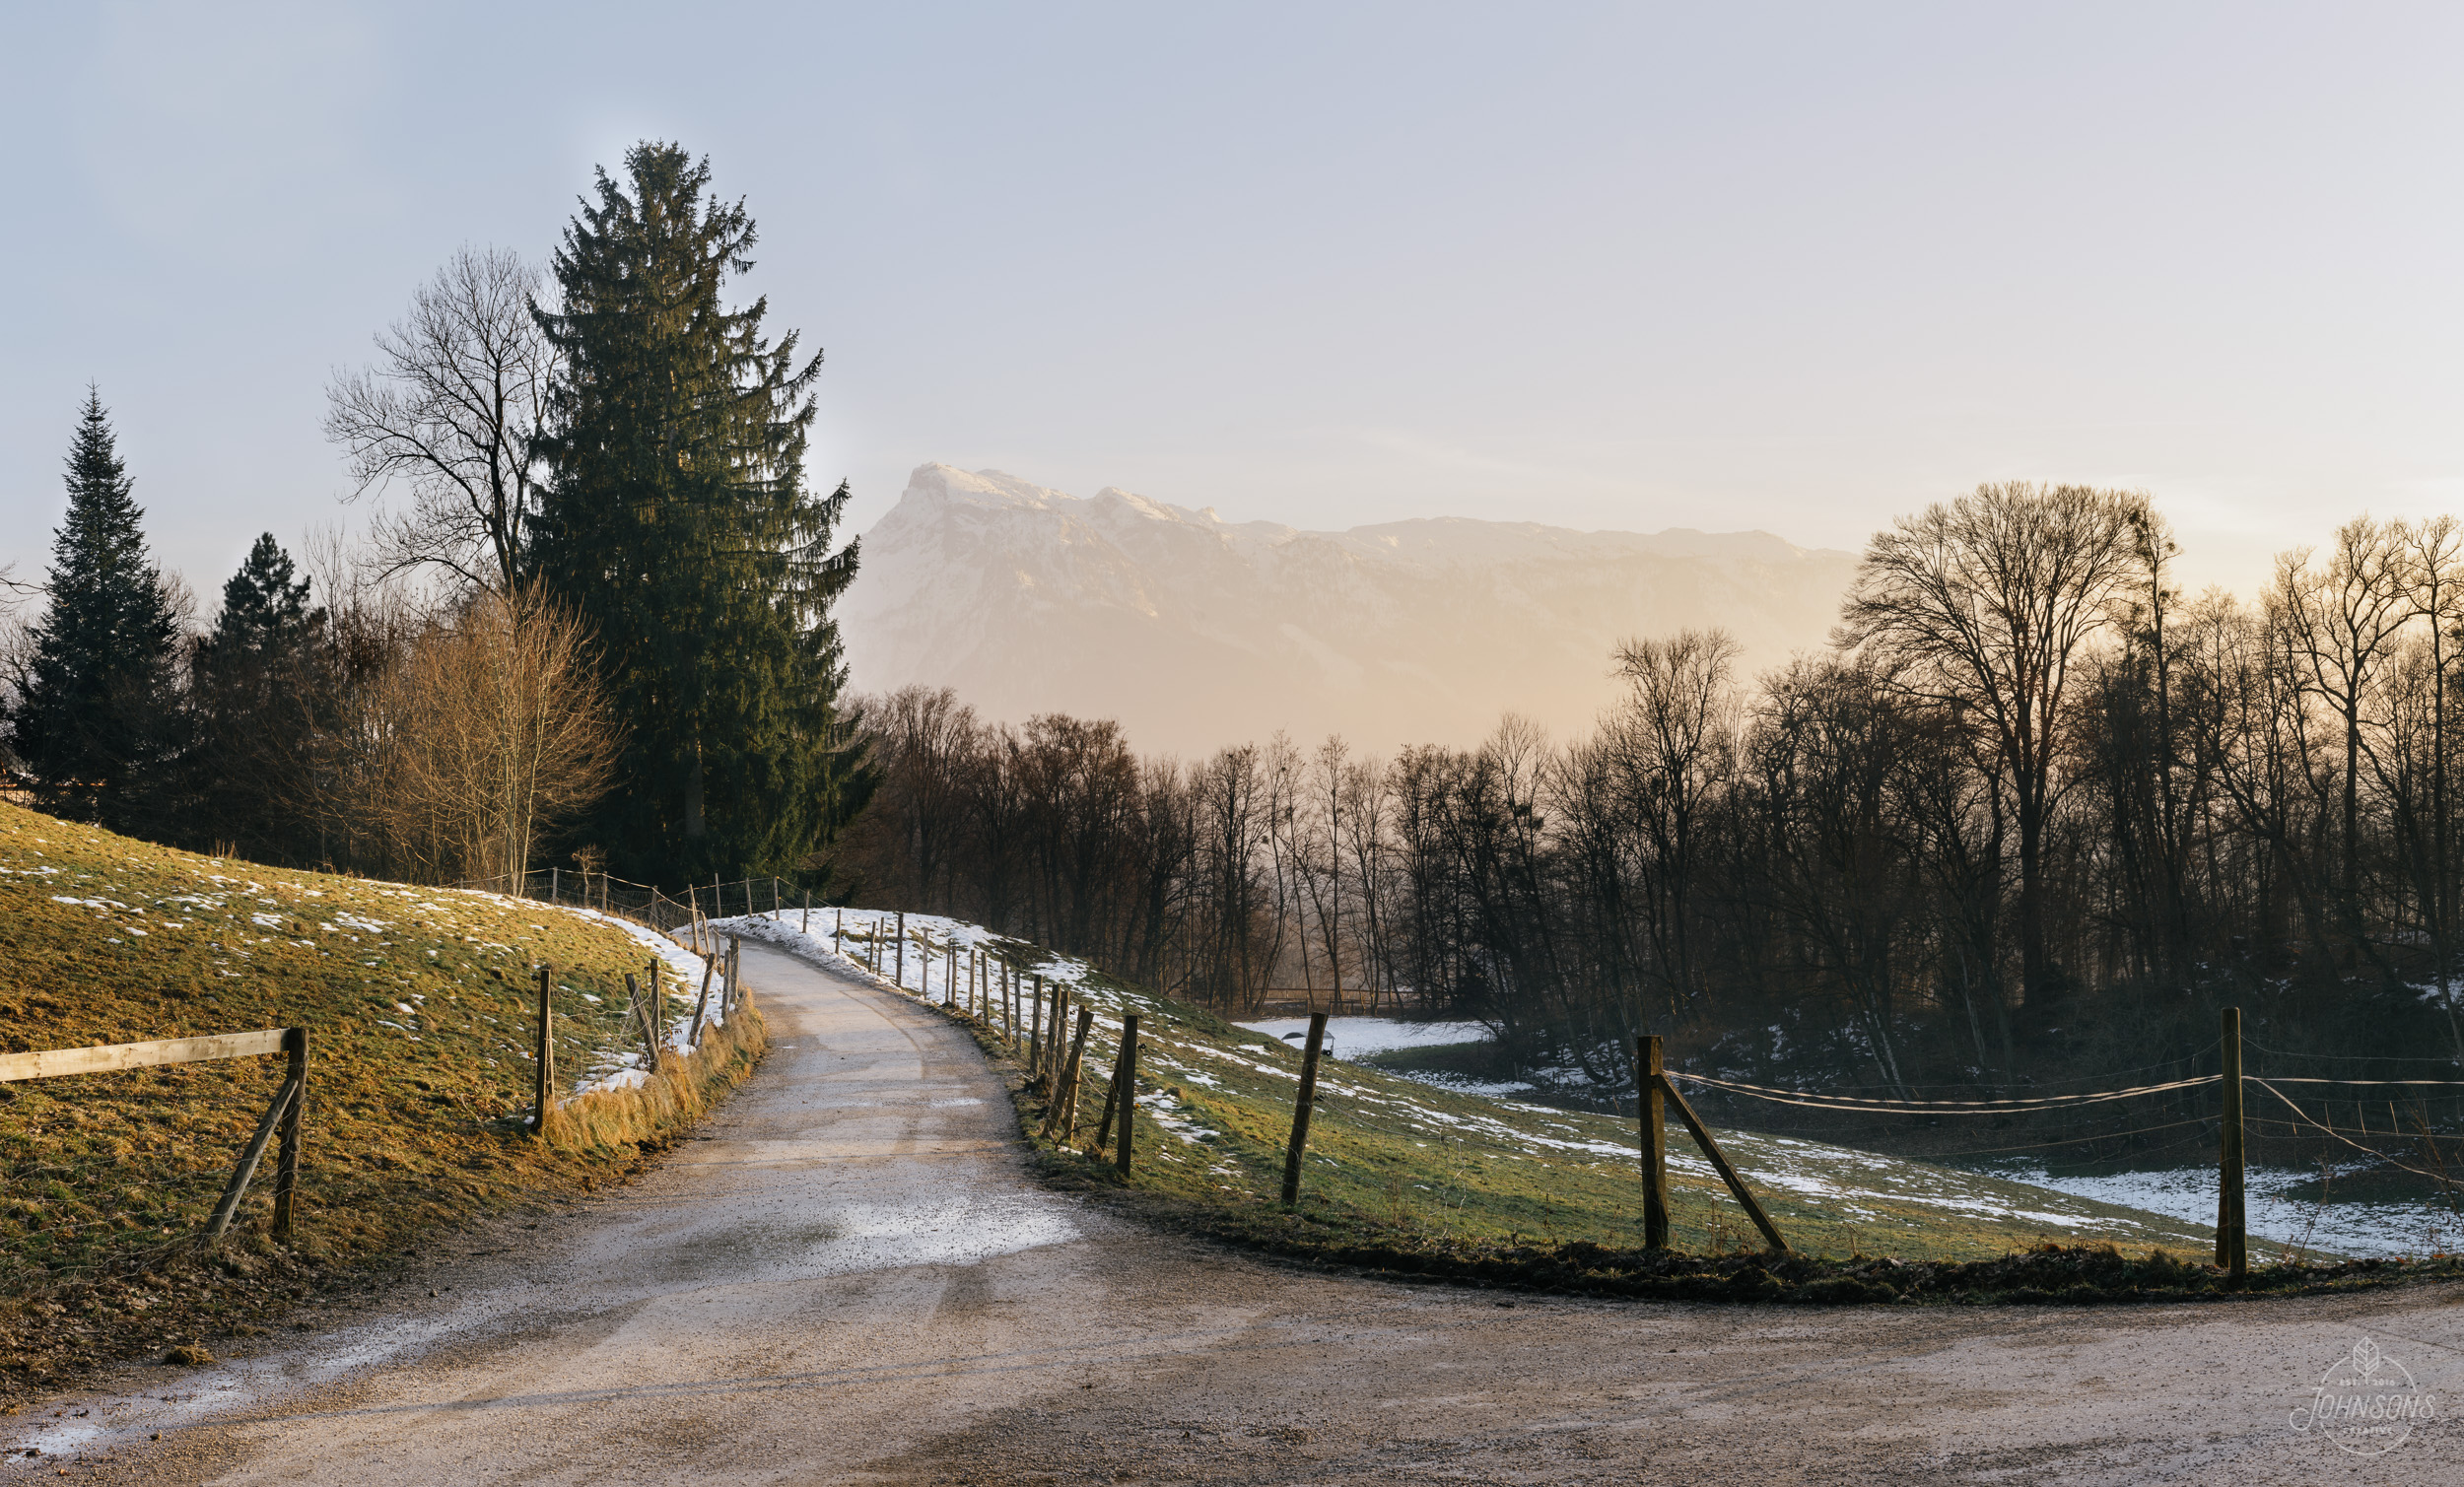  Sony a7rii |&nbsp;55mm 1.8 |&nbsp;f14 |&nbsp;1/13 sec |&nbsp;ISO 50 |&nbsp;5 image stitched panorama     This location is about a 10 minute walk West of the Museum Der Moderne Salzburg. I am a bit bummed because the composition is so great but the t